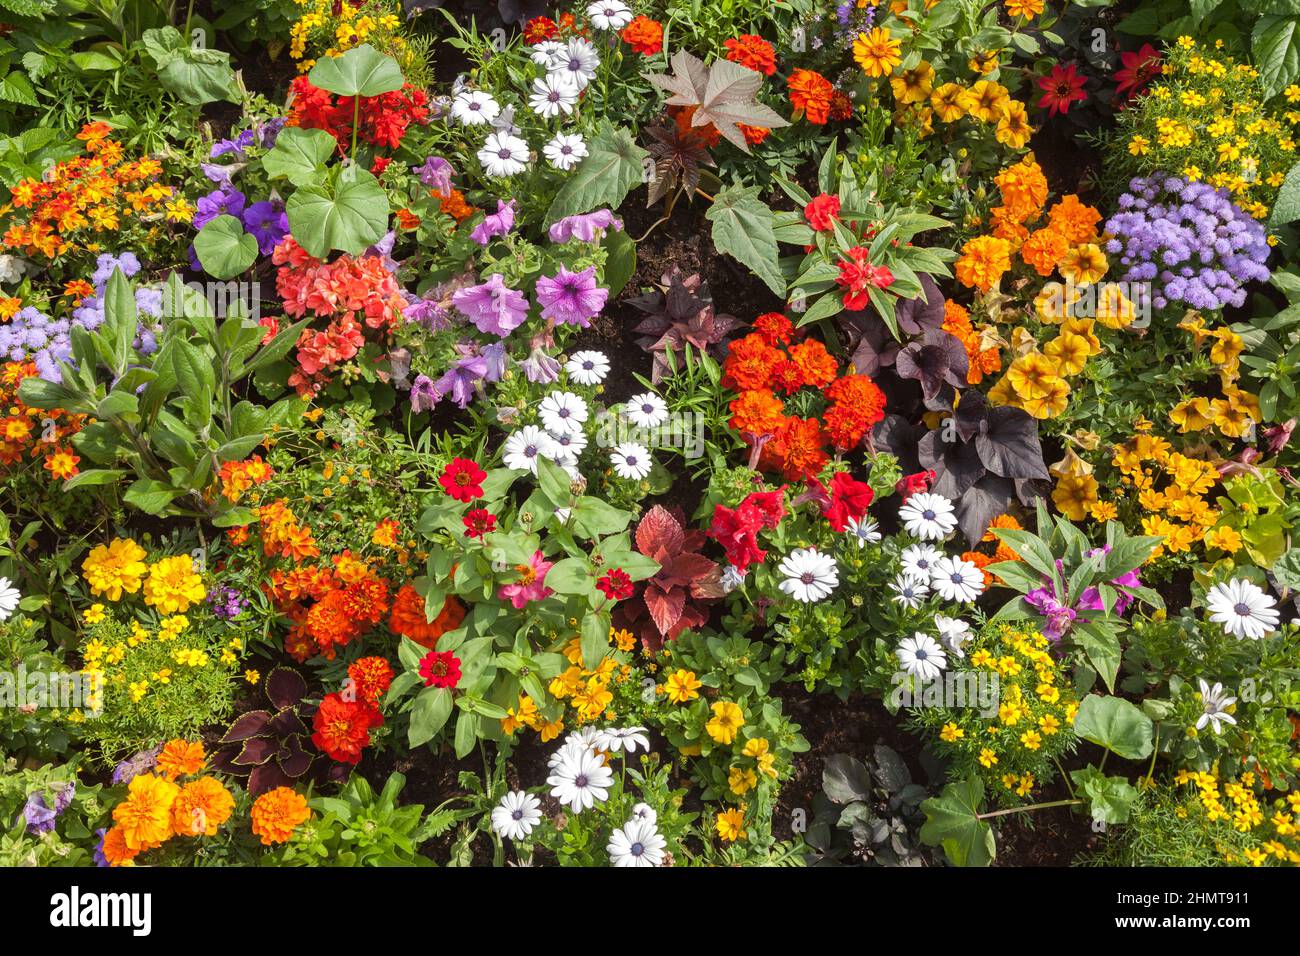 Ccolorful flowerbed, Germany Stock Photo